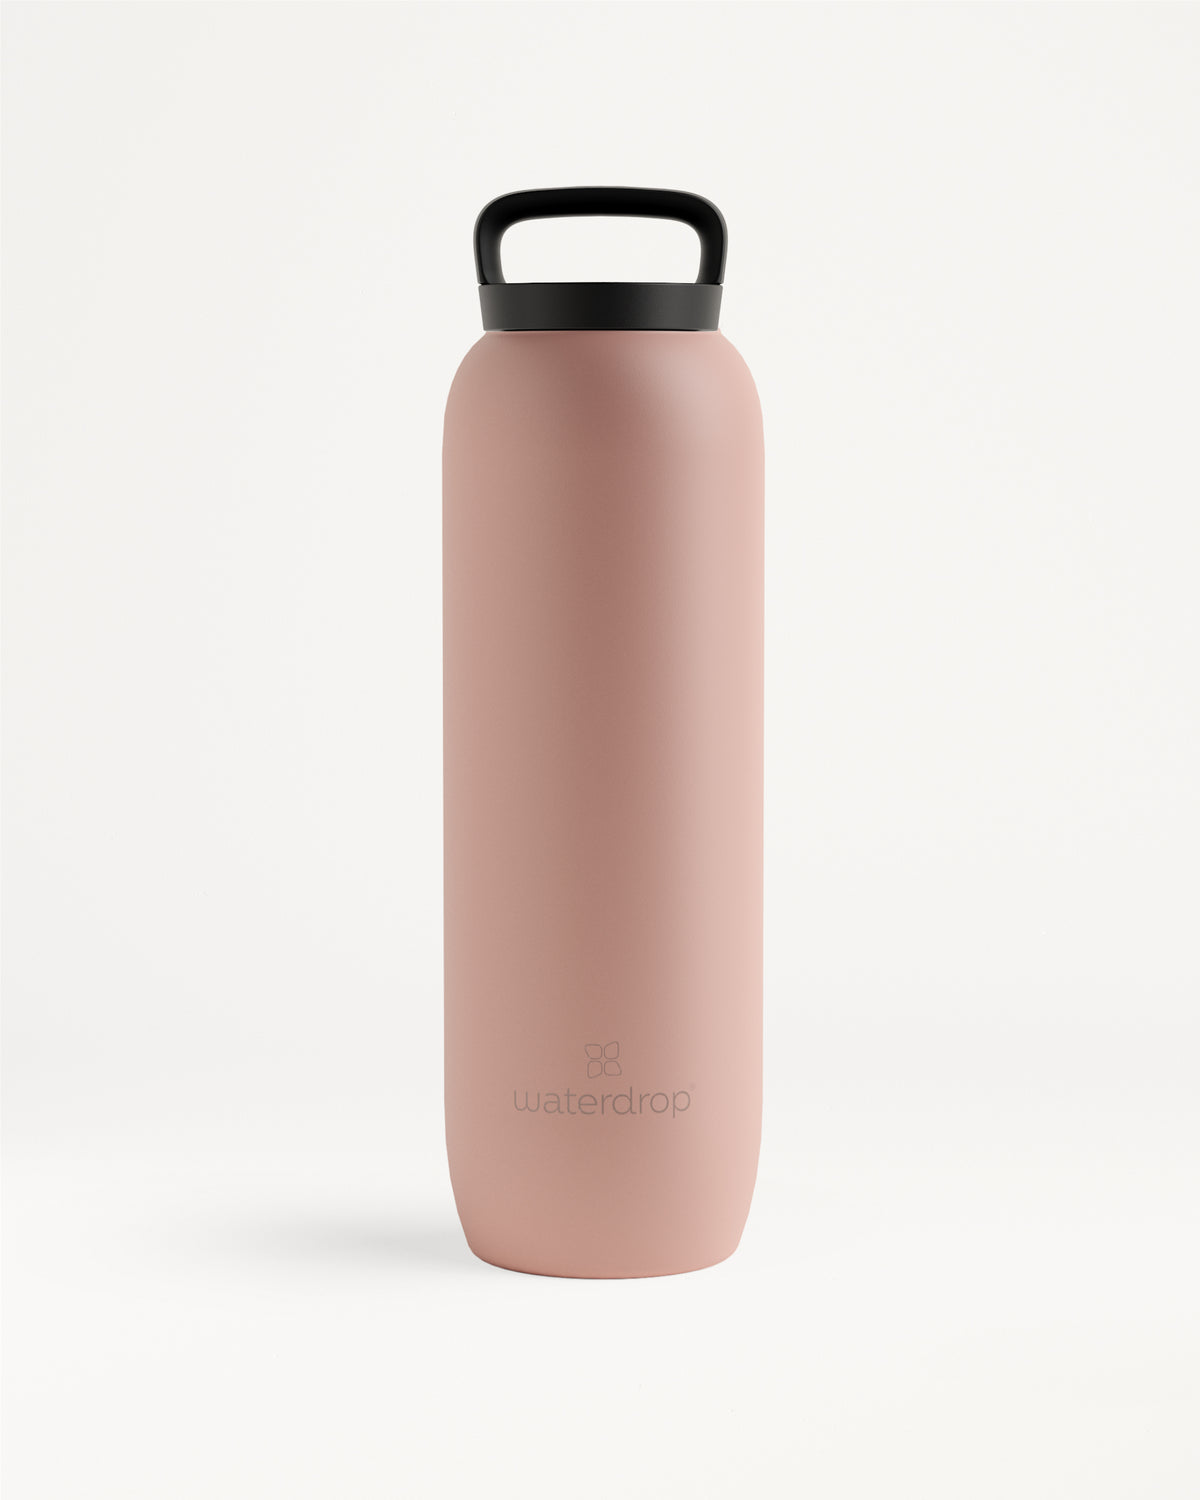 All Mine! Personalized 20 oz. Water Bottle